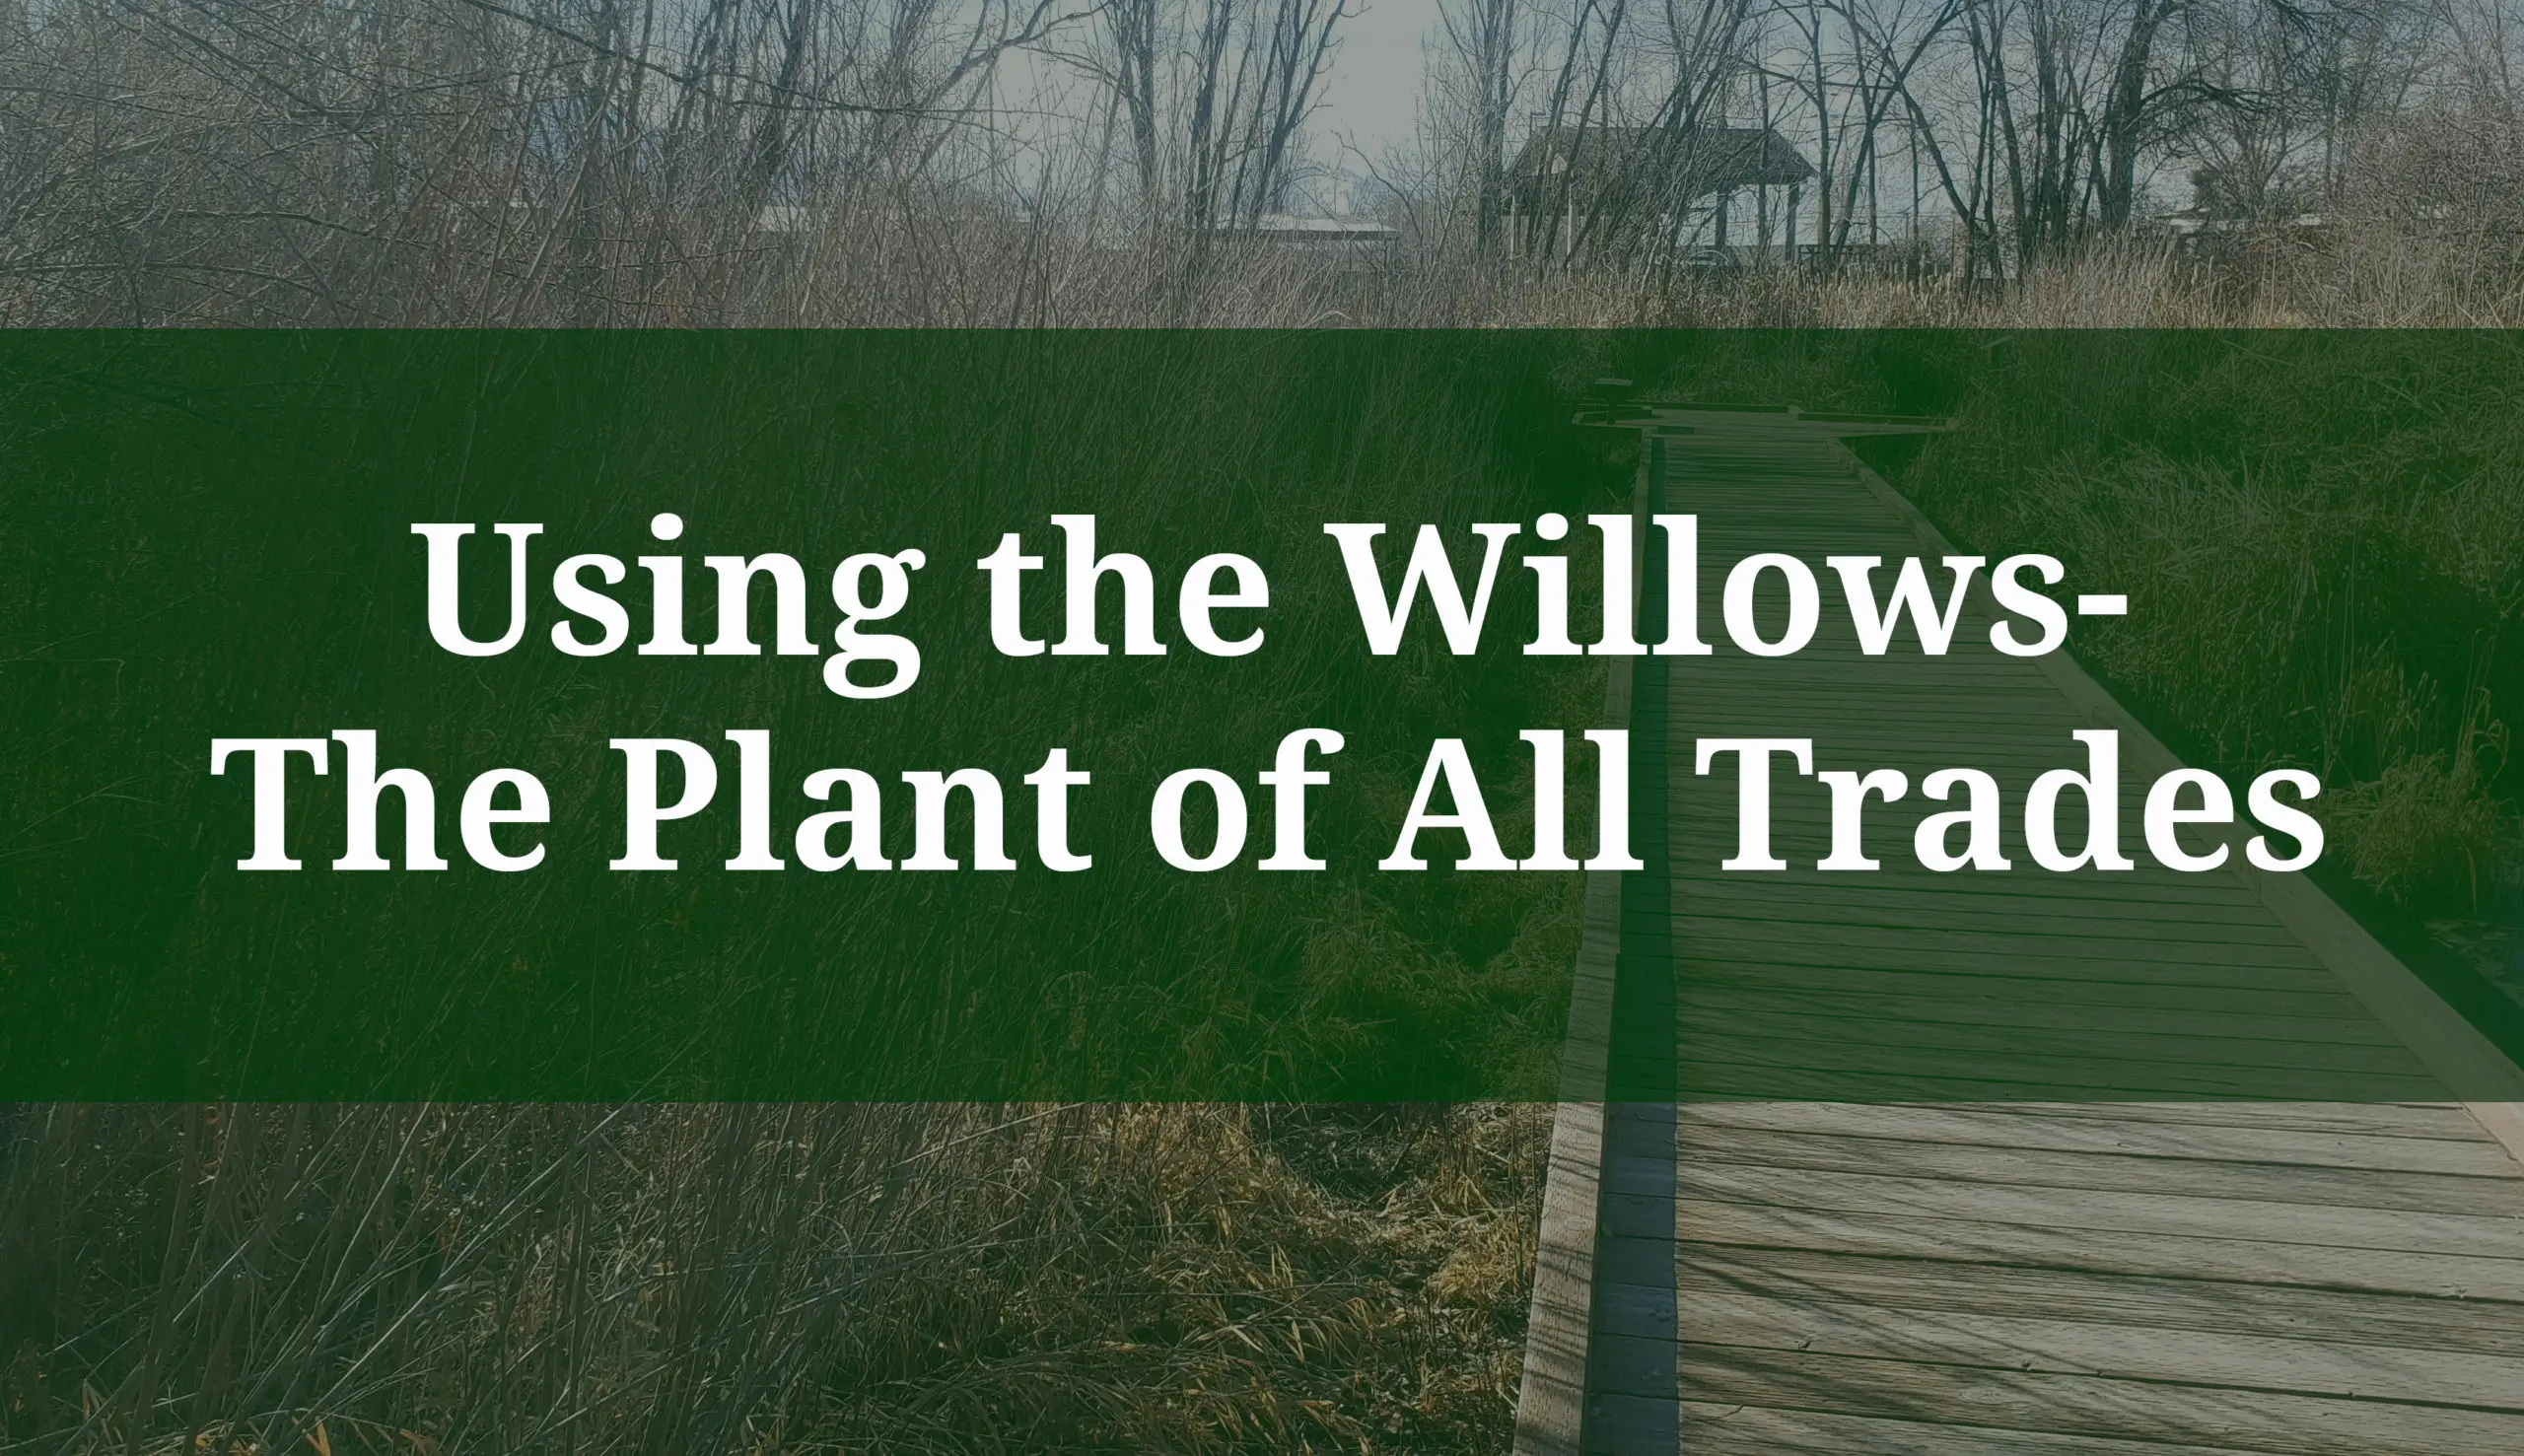 Using the Willows- The Plant of All Trades